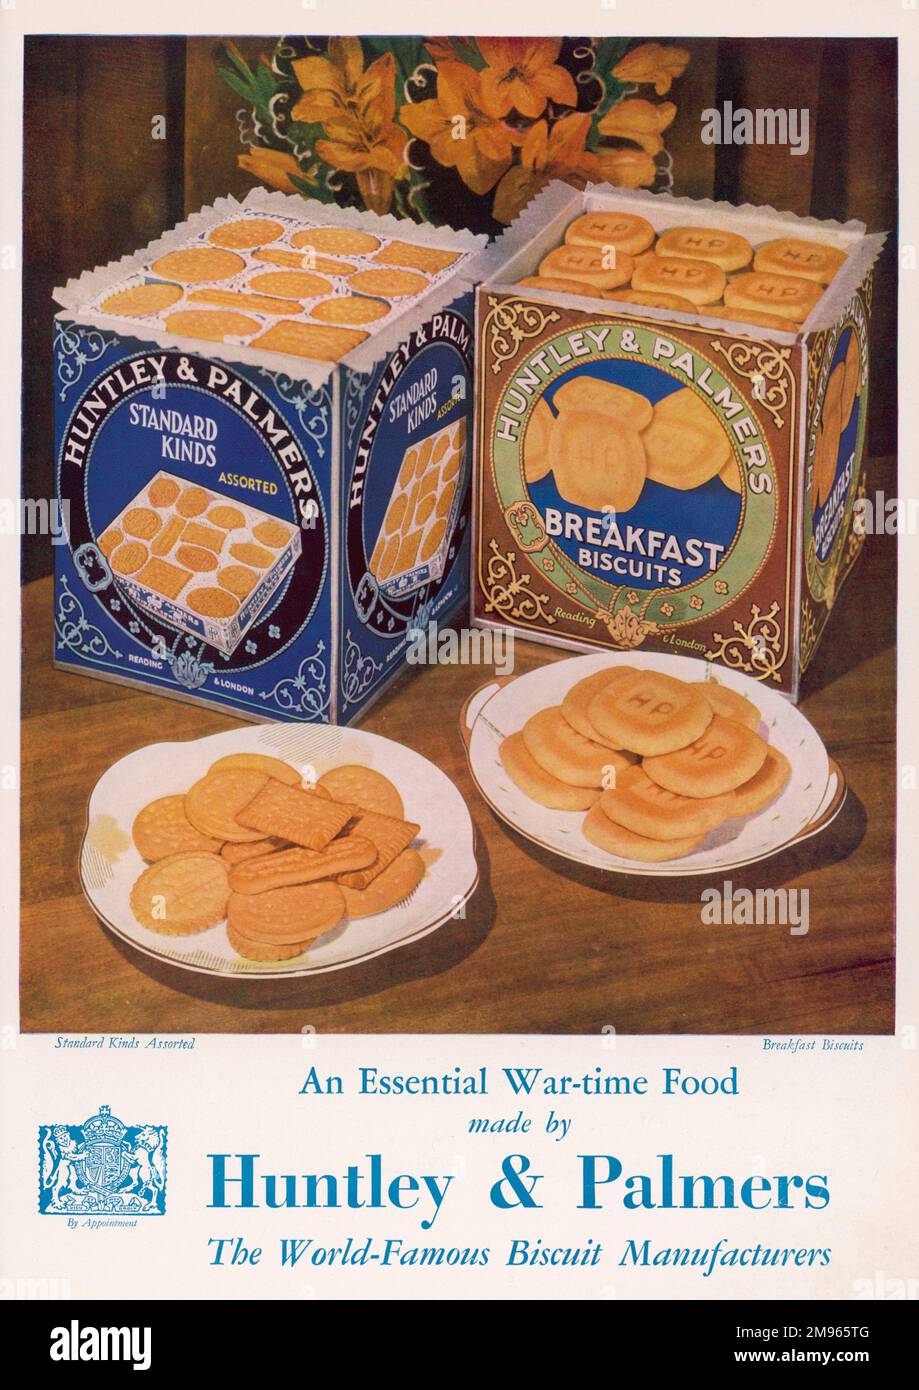 Colour advert for Huntley and Palmer's breakfast biscuits and 'standard kinds' - 'an essential war-time food'. Stock Photo